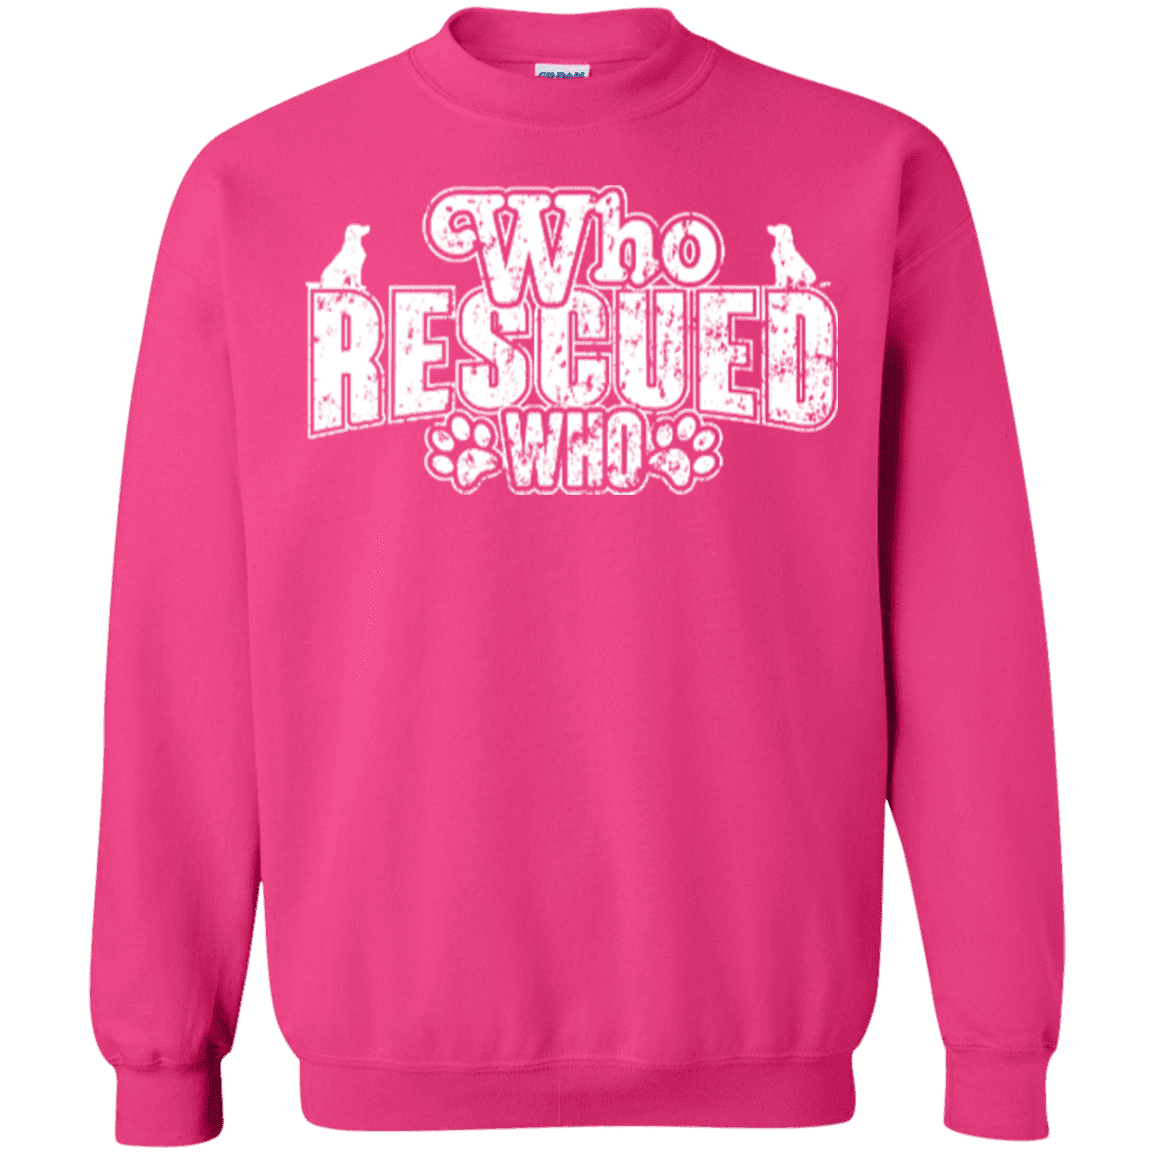 Who Rescued Who - Sweatshirt.